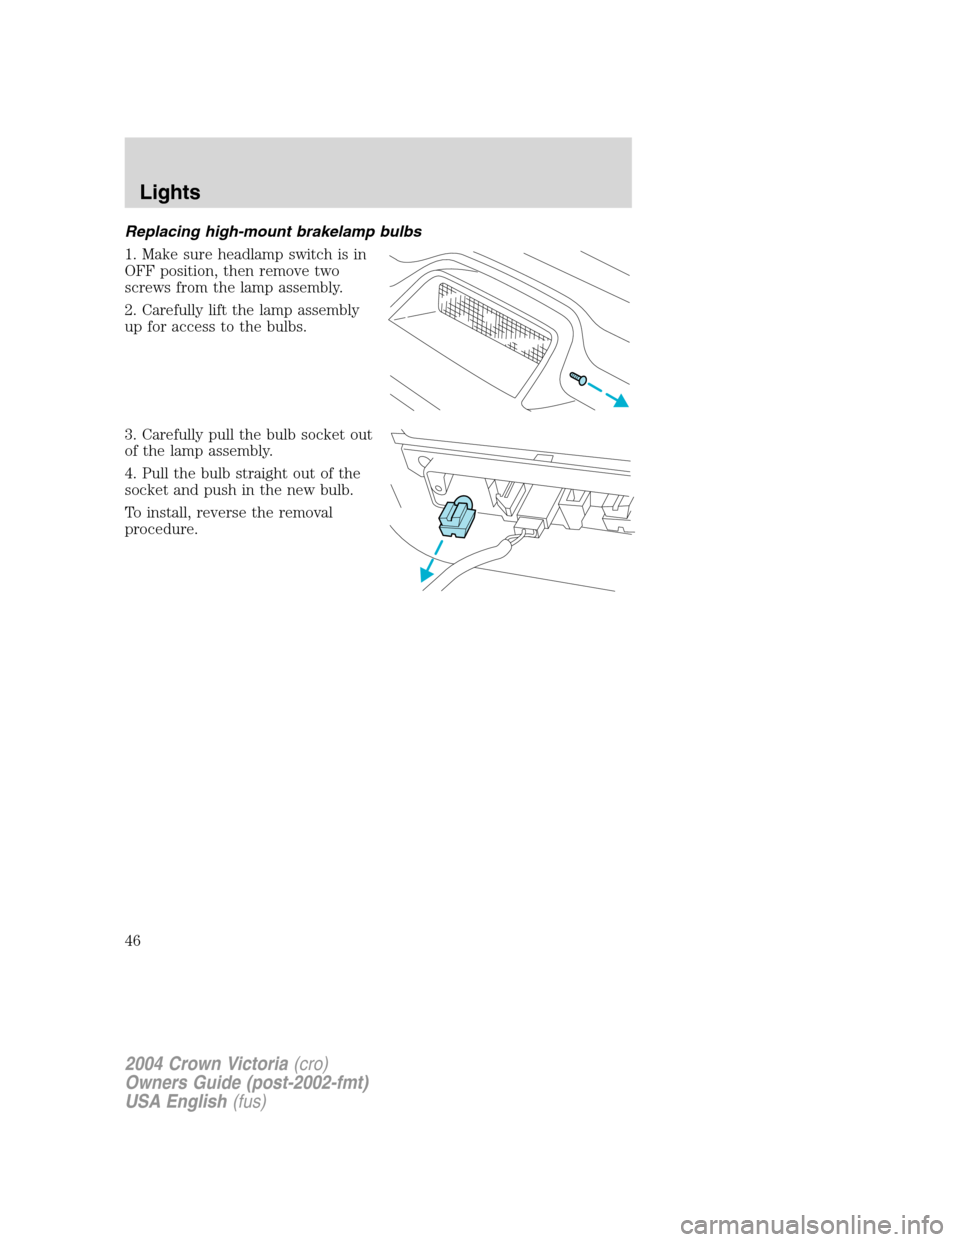 FORD CROWN VICTORIA 2004 2.G Service Manual Replacing high-mount brakelamp bulbs
1. Make sure headlamp switch is in
OFF position, then remove two
screws from the lamp assembly.
2. Carefully lift the lamp assembly
up for access to the bulbs.
3. 